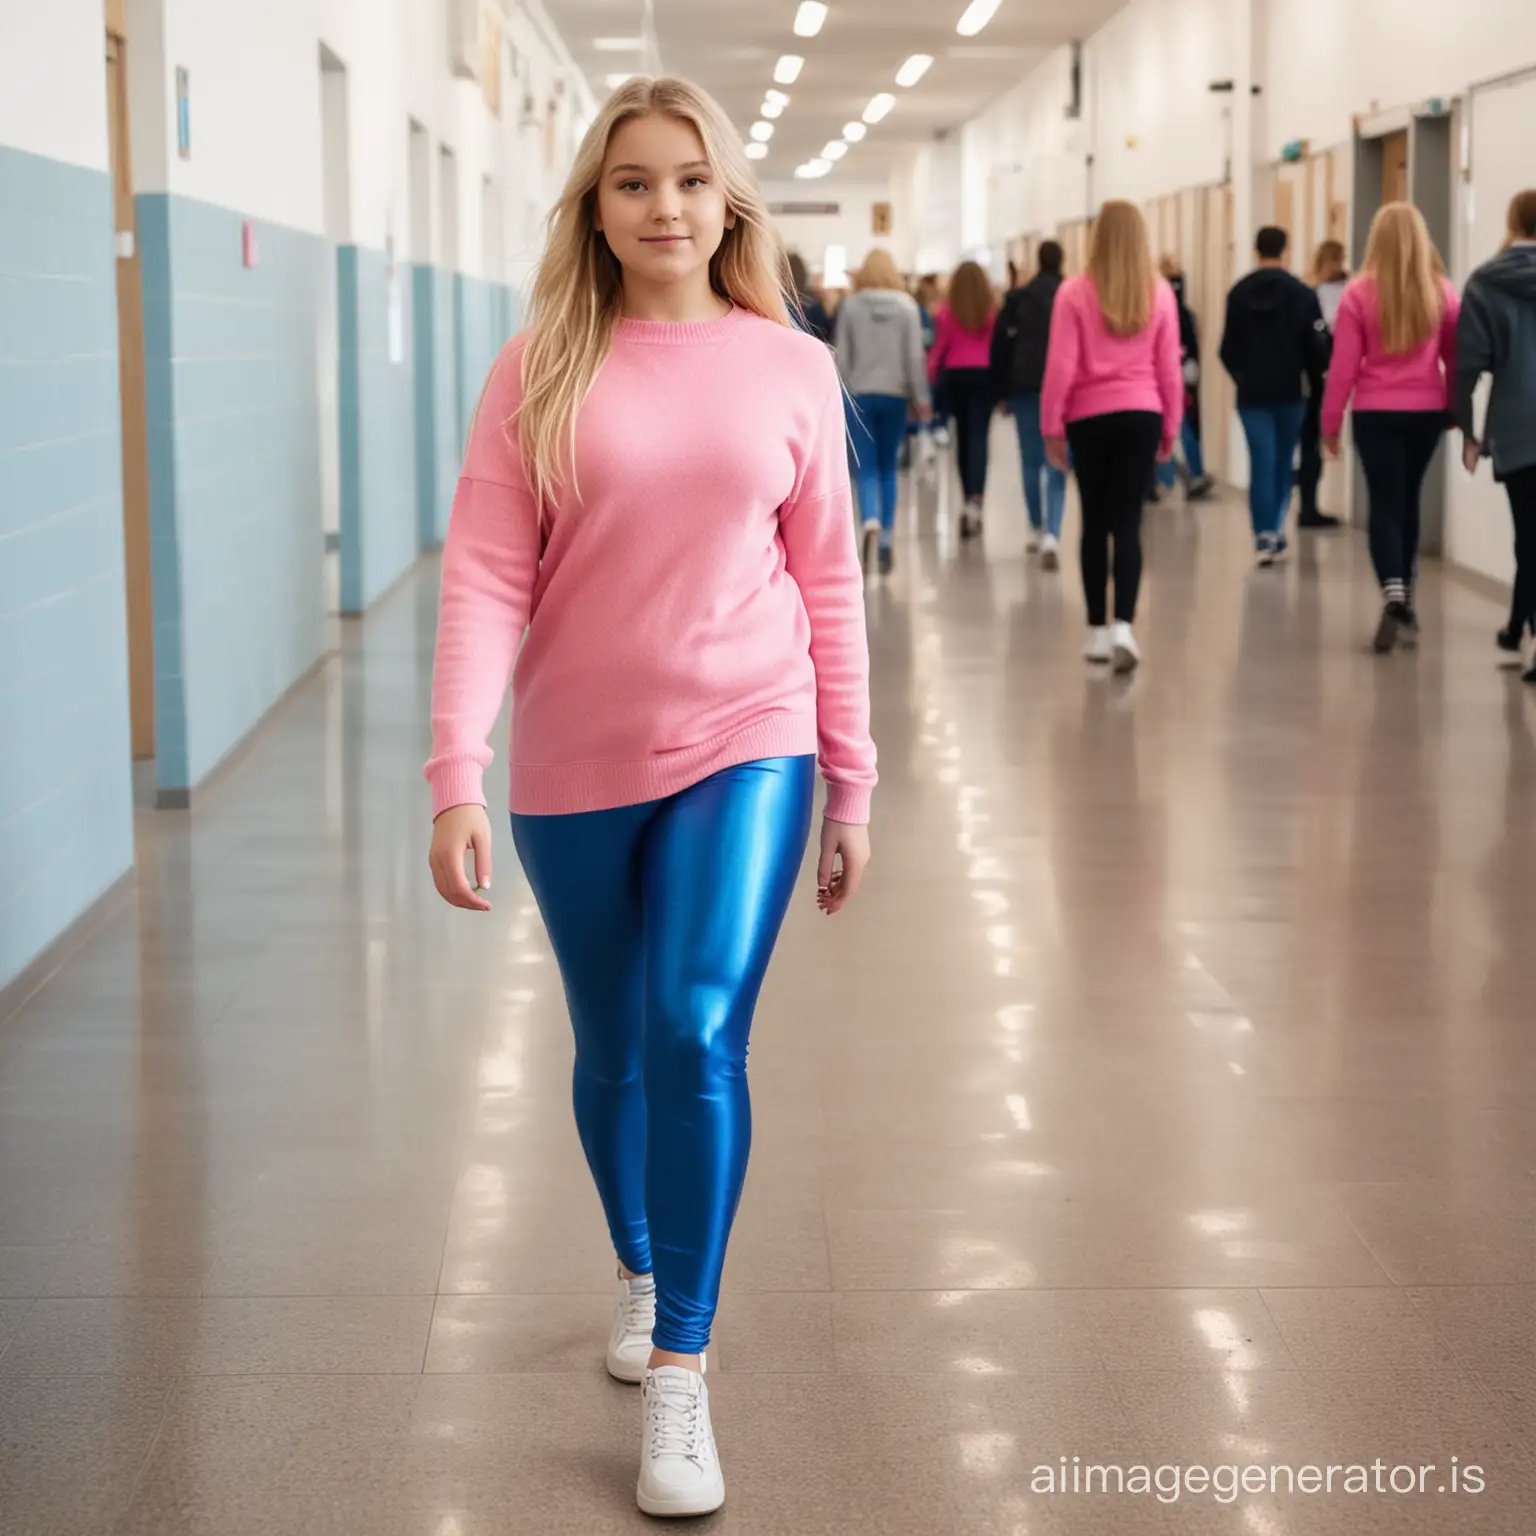 thirteen years old curvy girl in shiny blue leggings and pink blue sweater with blonde hair walking in crowded school hall